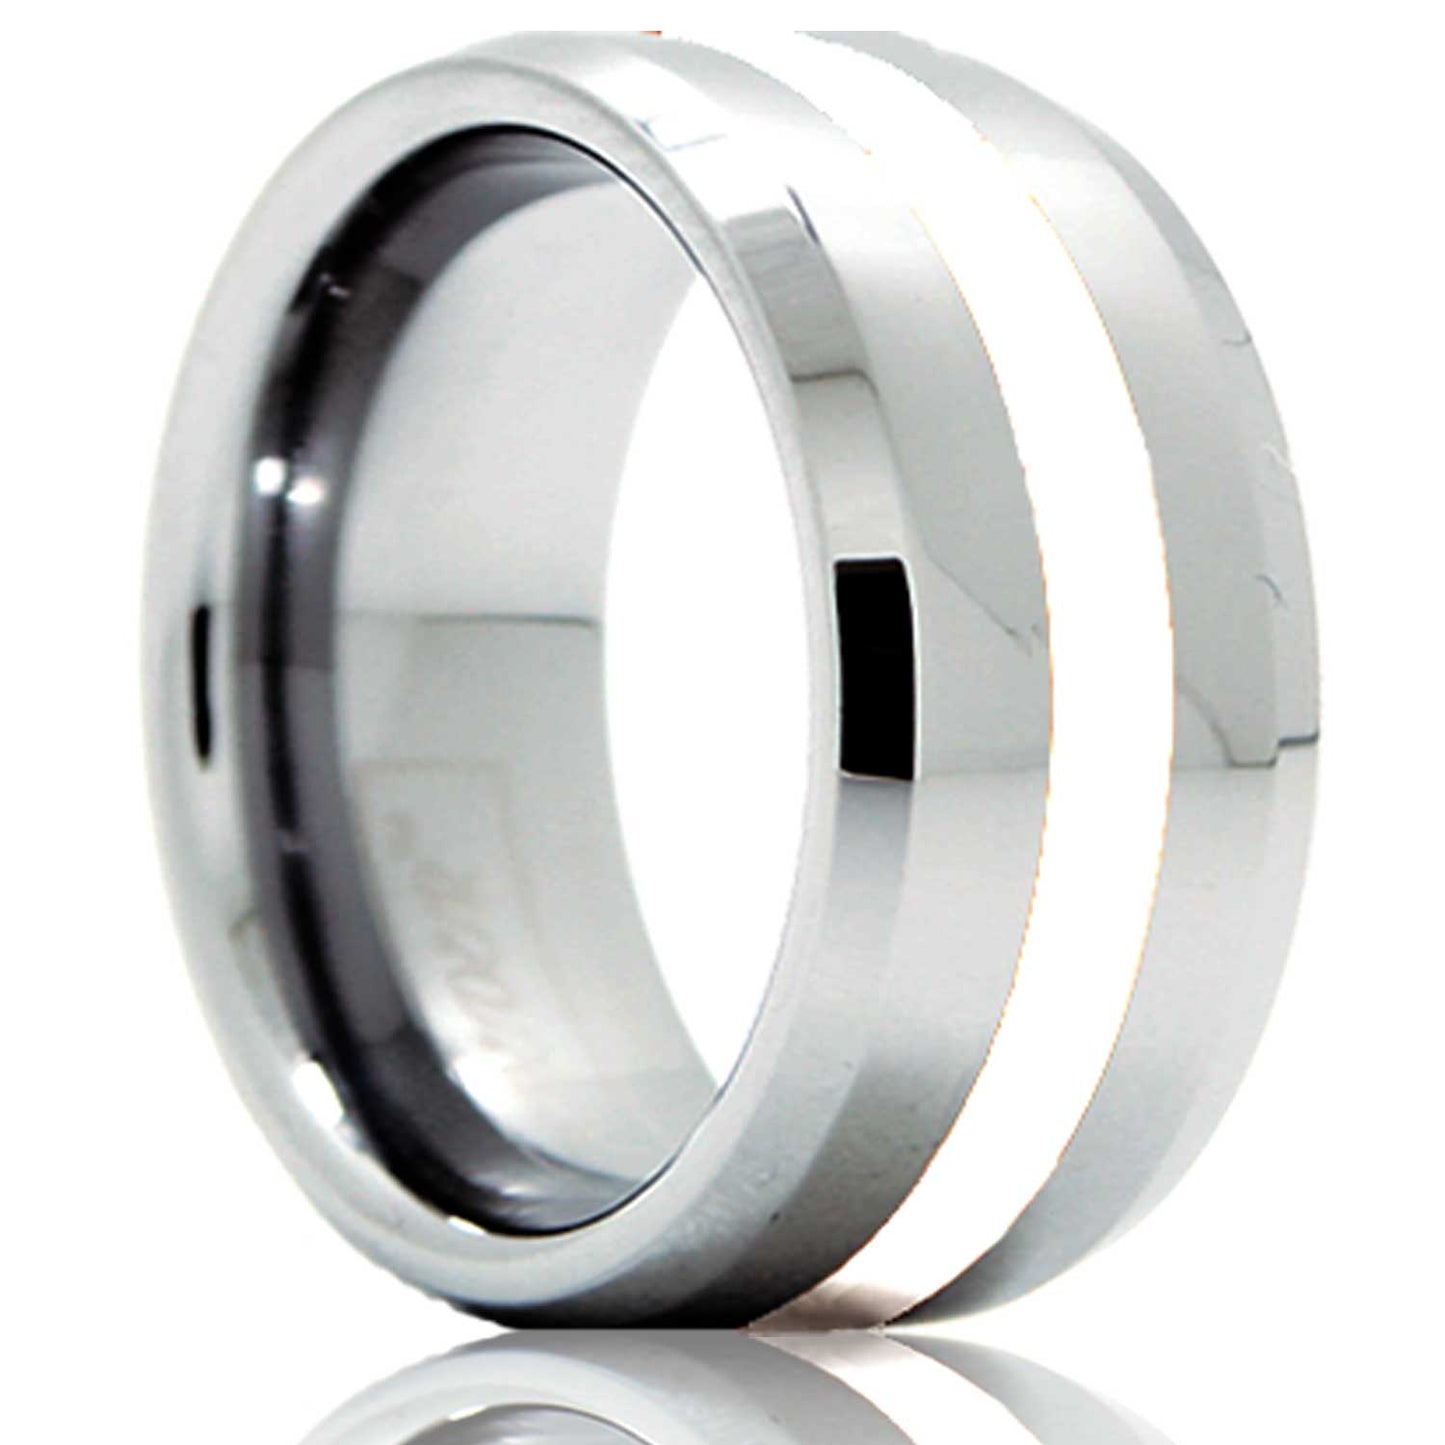 A argentium silver inlay cobalt wedding band with beveled edges displayed on a neutral white background.